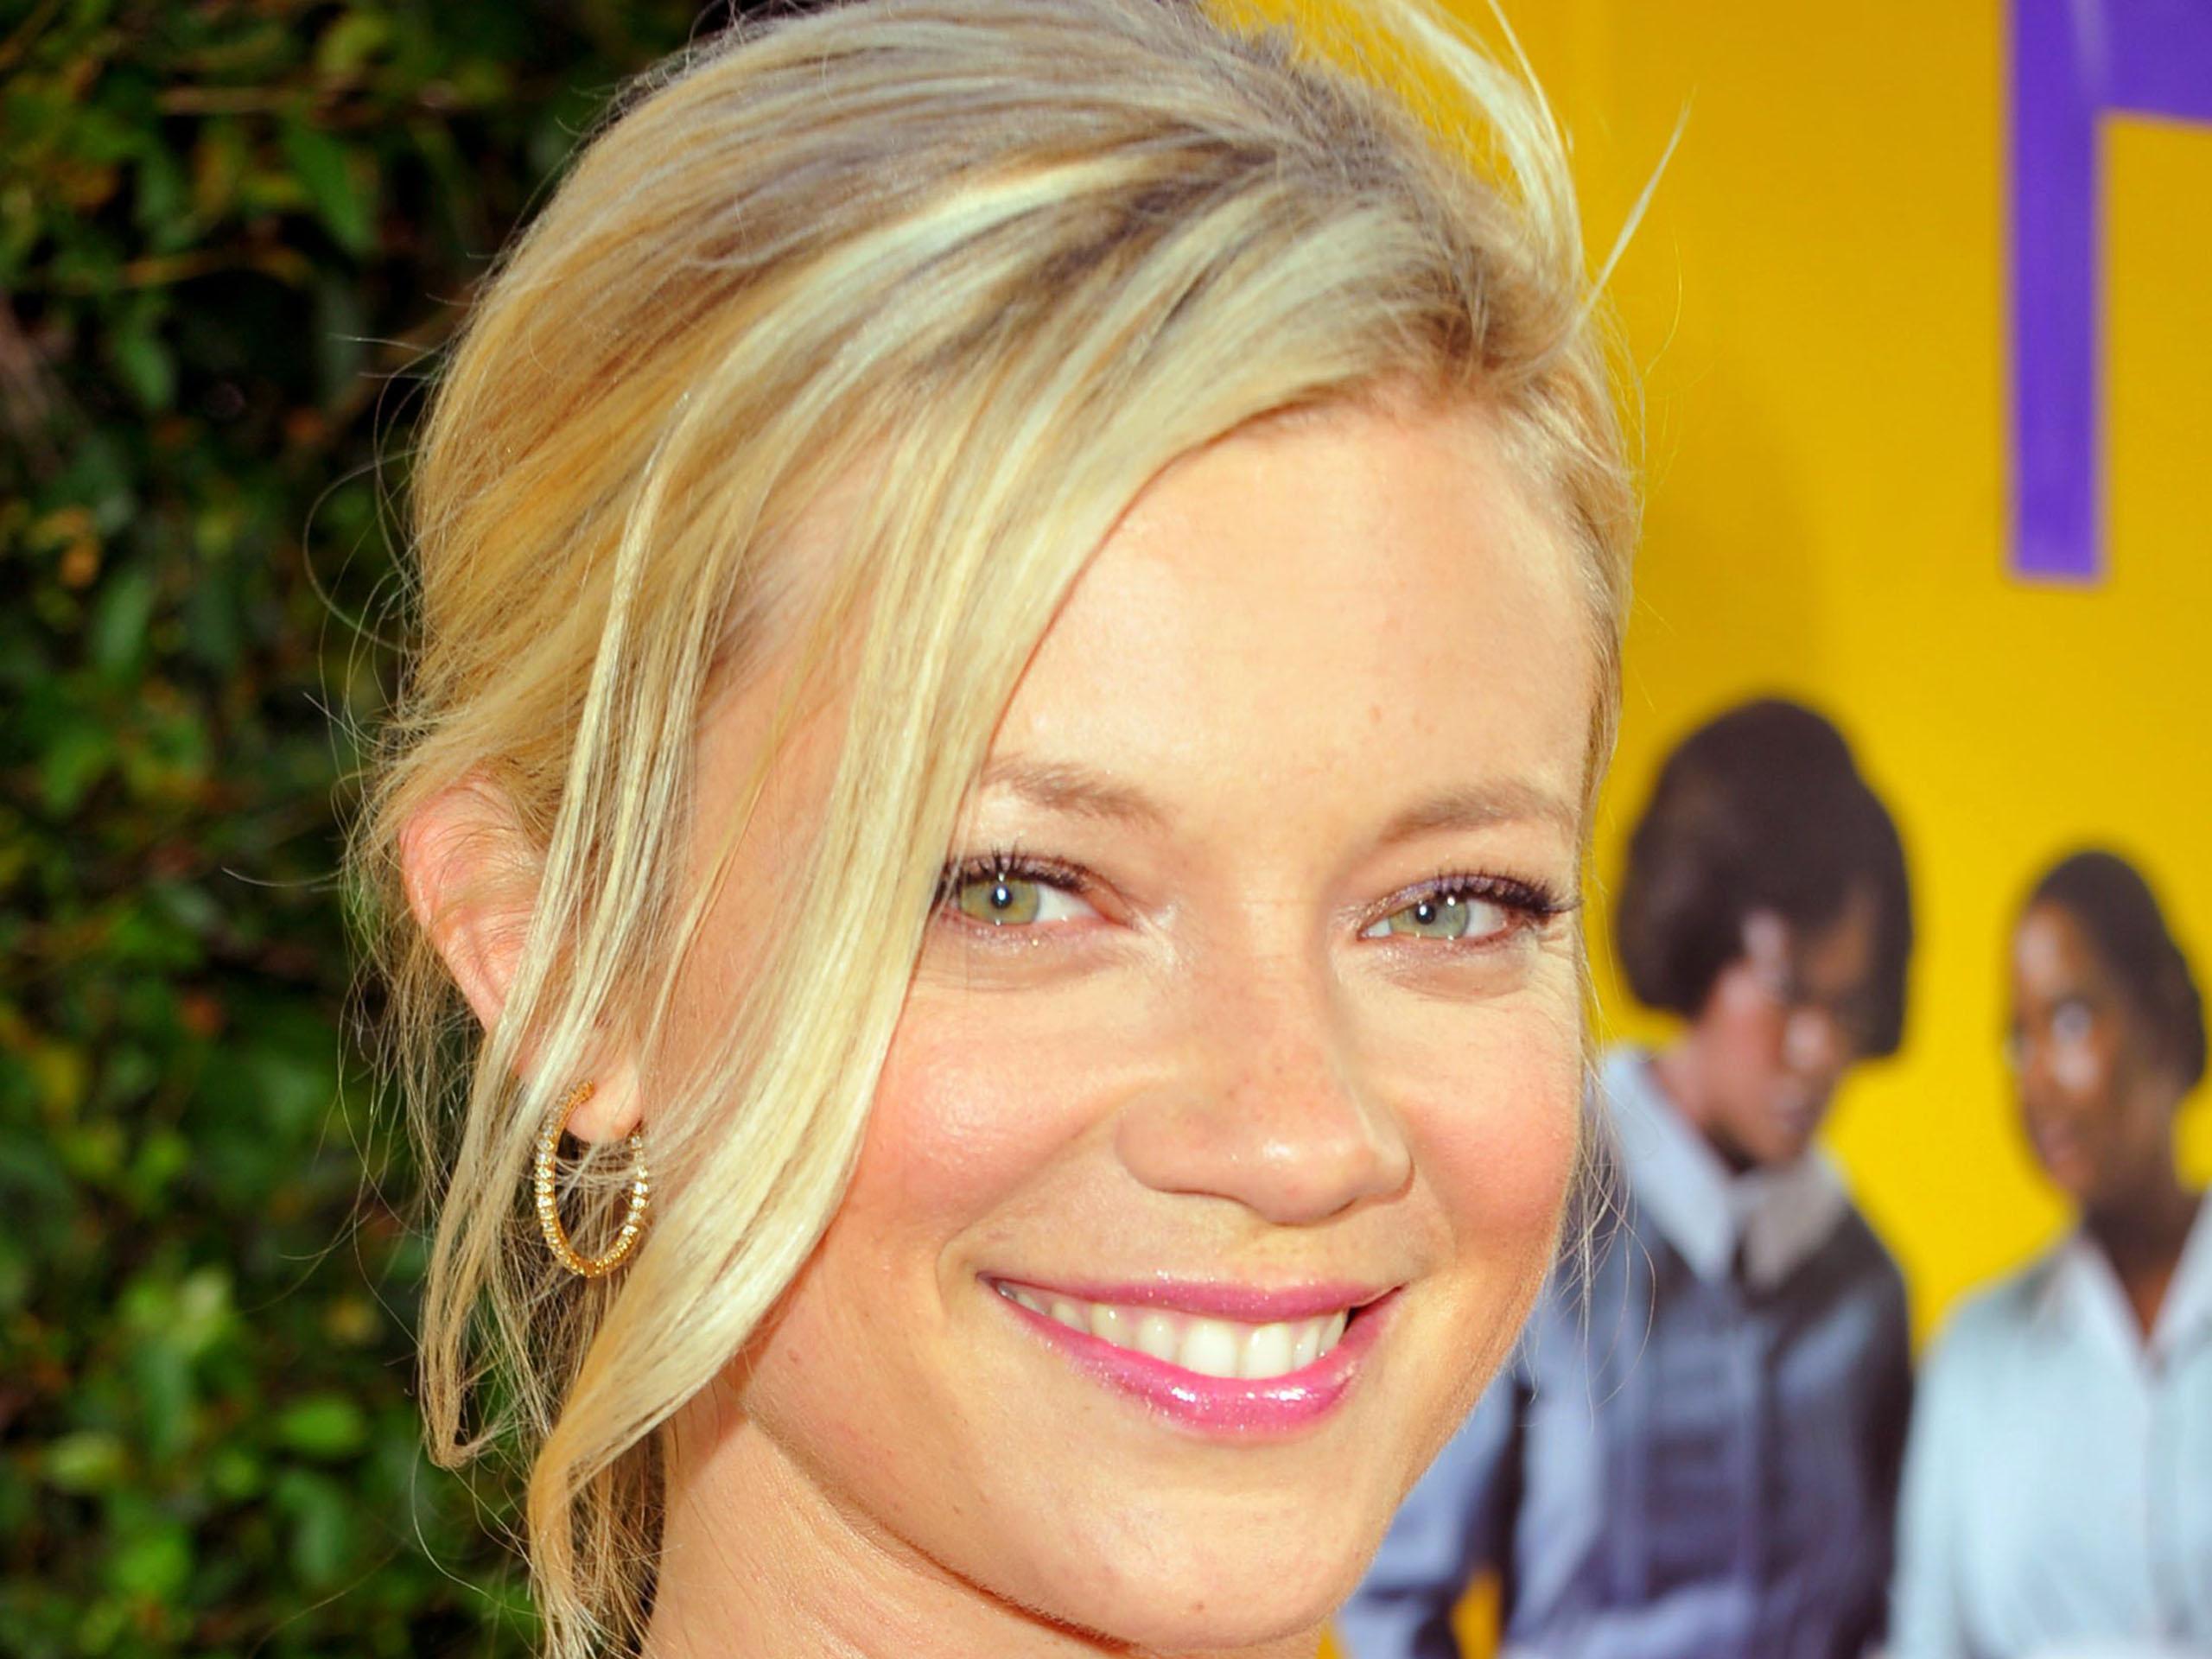 Amy Smart Smile Wallpaper Background 52131 2560x1920px